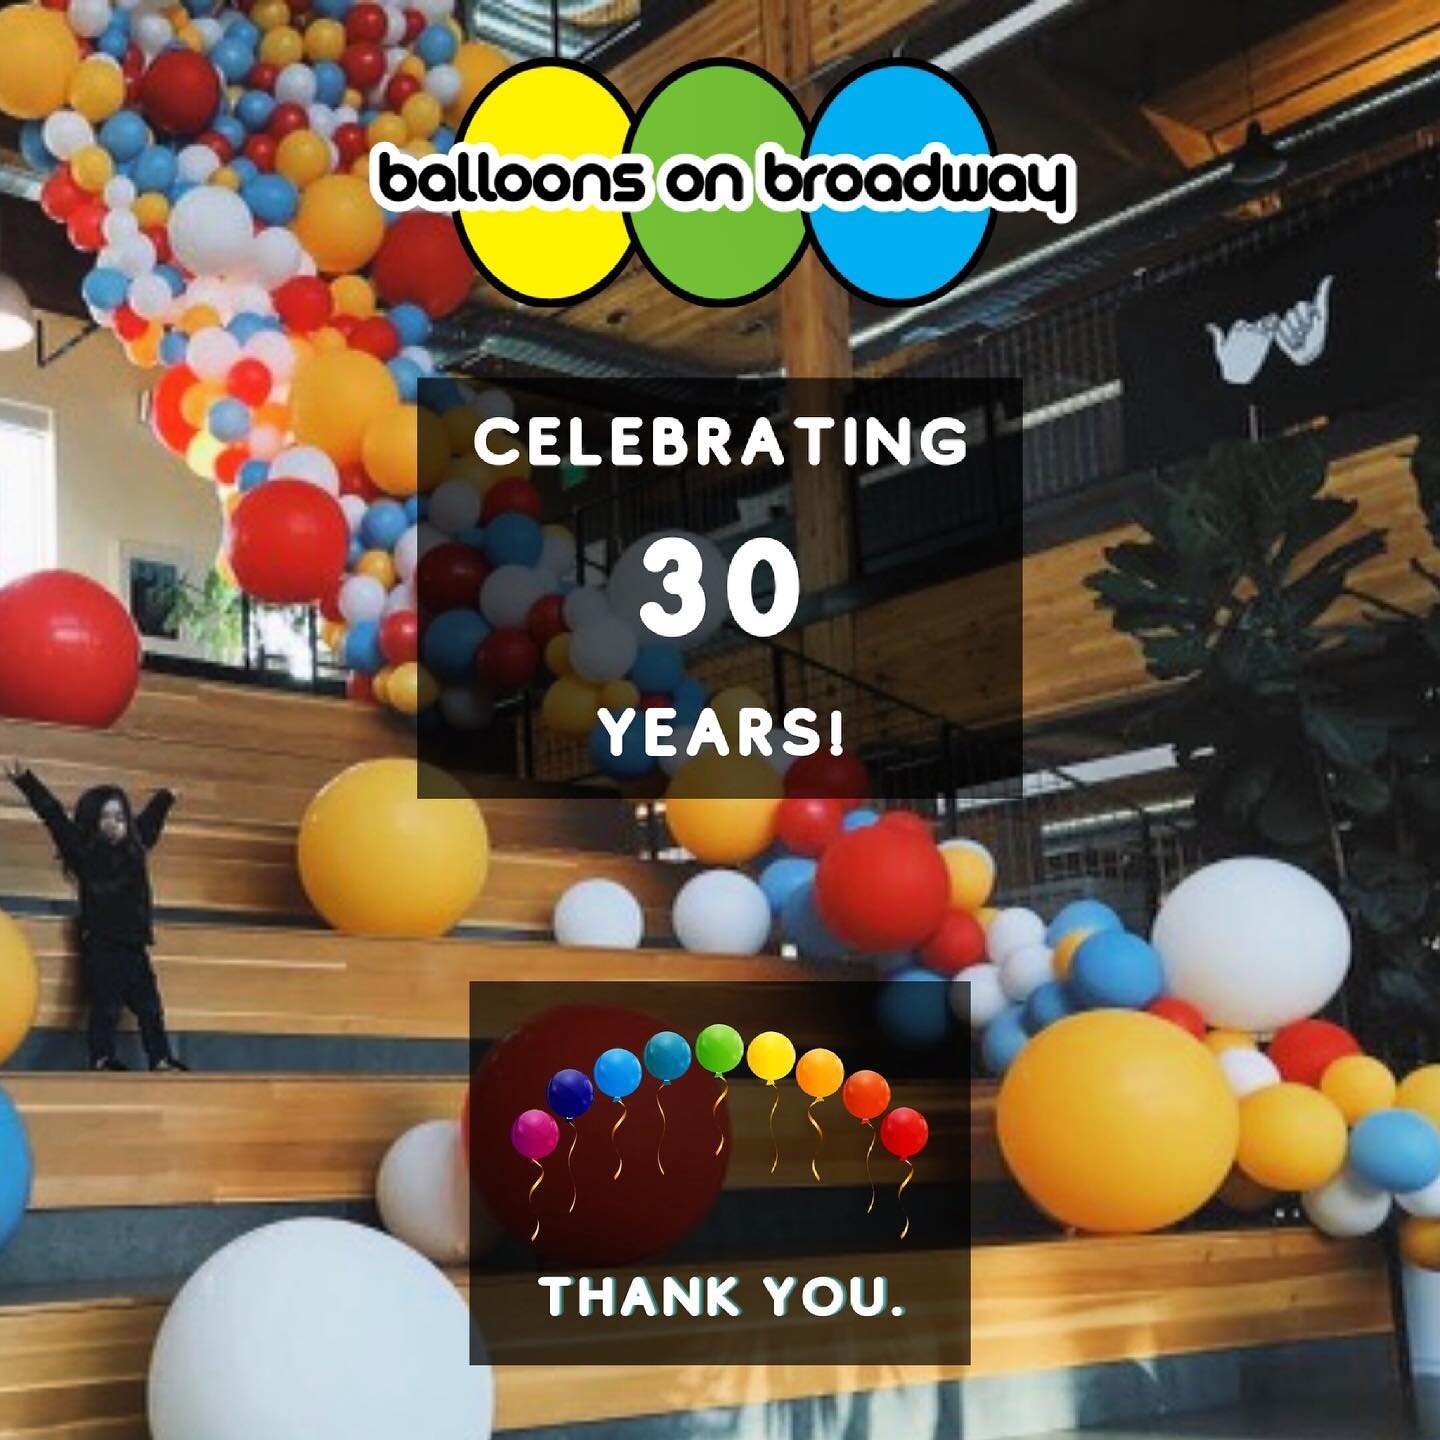 It's our 30th Anniversary! 

June 1st marks 30 years of helping Portland celebrate and we couldn't be more proud! 
 
From birthdays to graduations, Pride to Mitzvahs, Balloons on Broadway has been there, providing professional balloon delivery and de